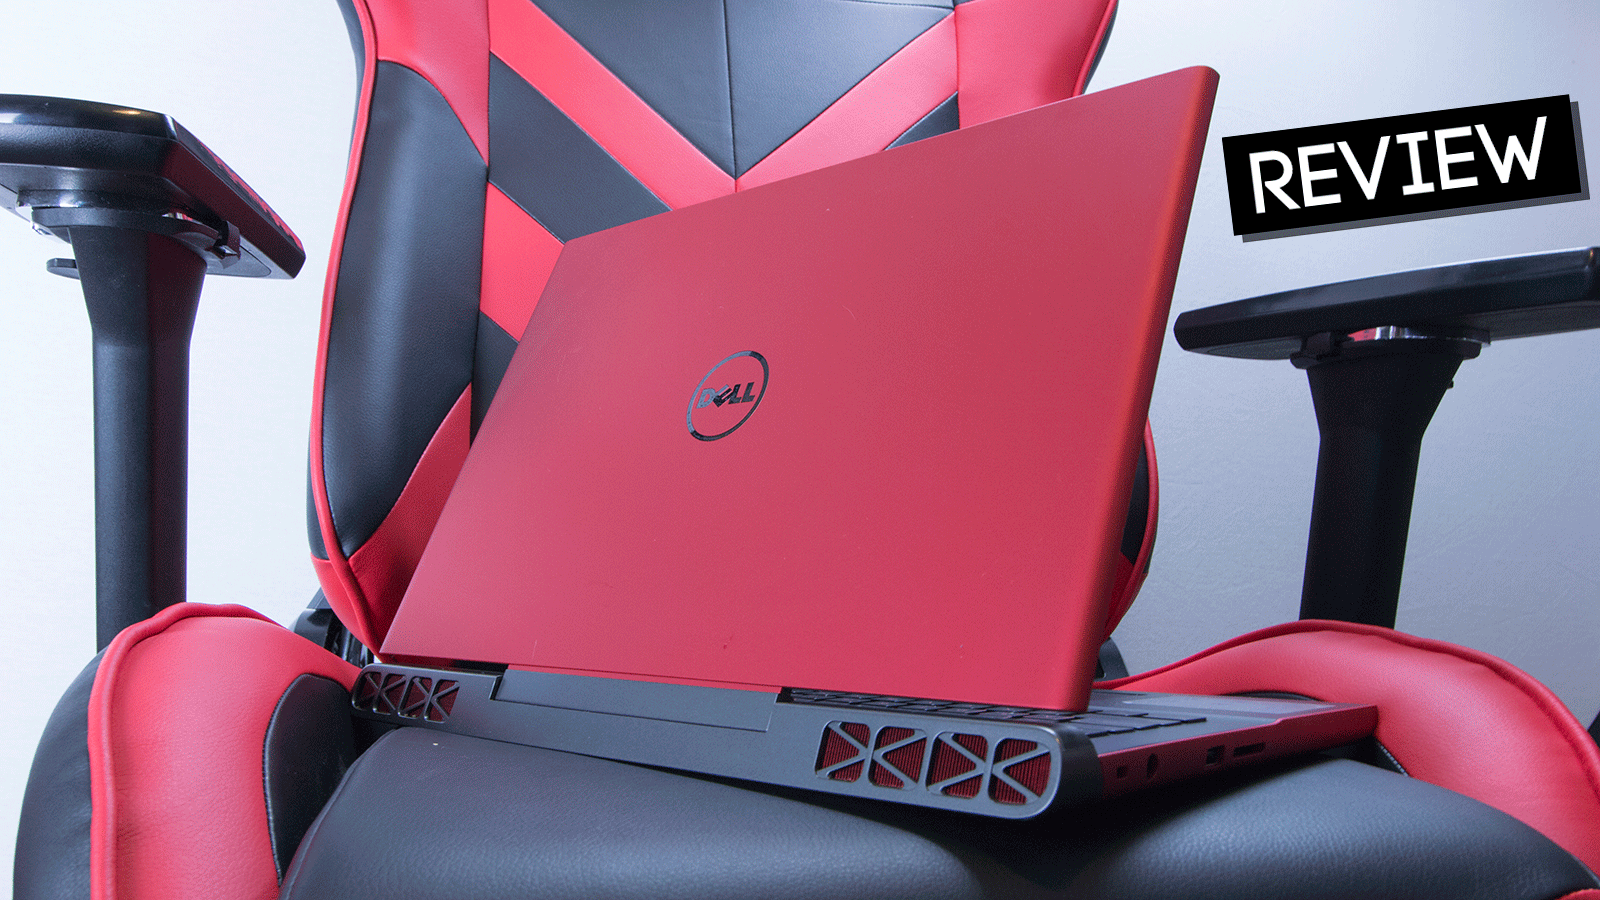 Dell Inspiron 15 7000 Gaming Laptop Review It Plays Games